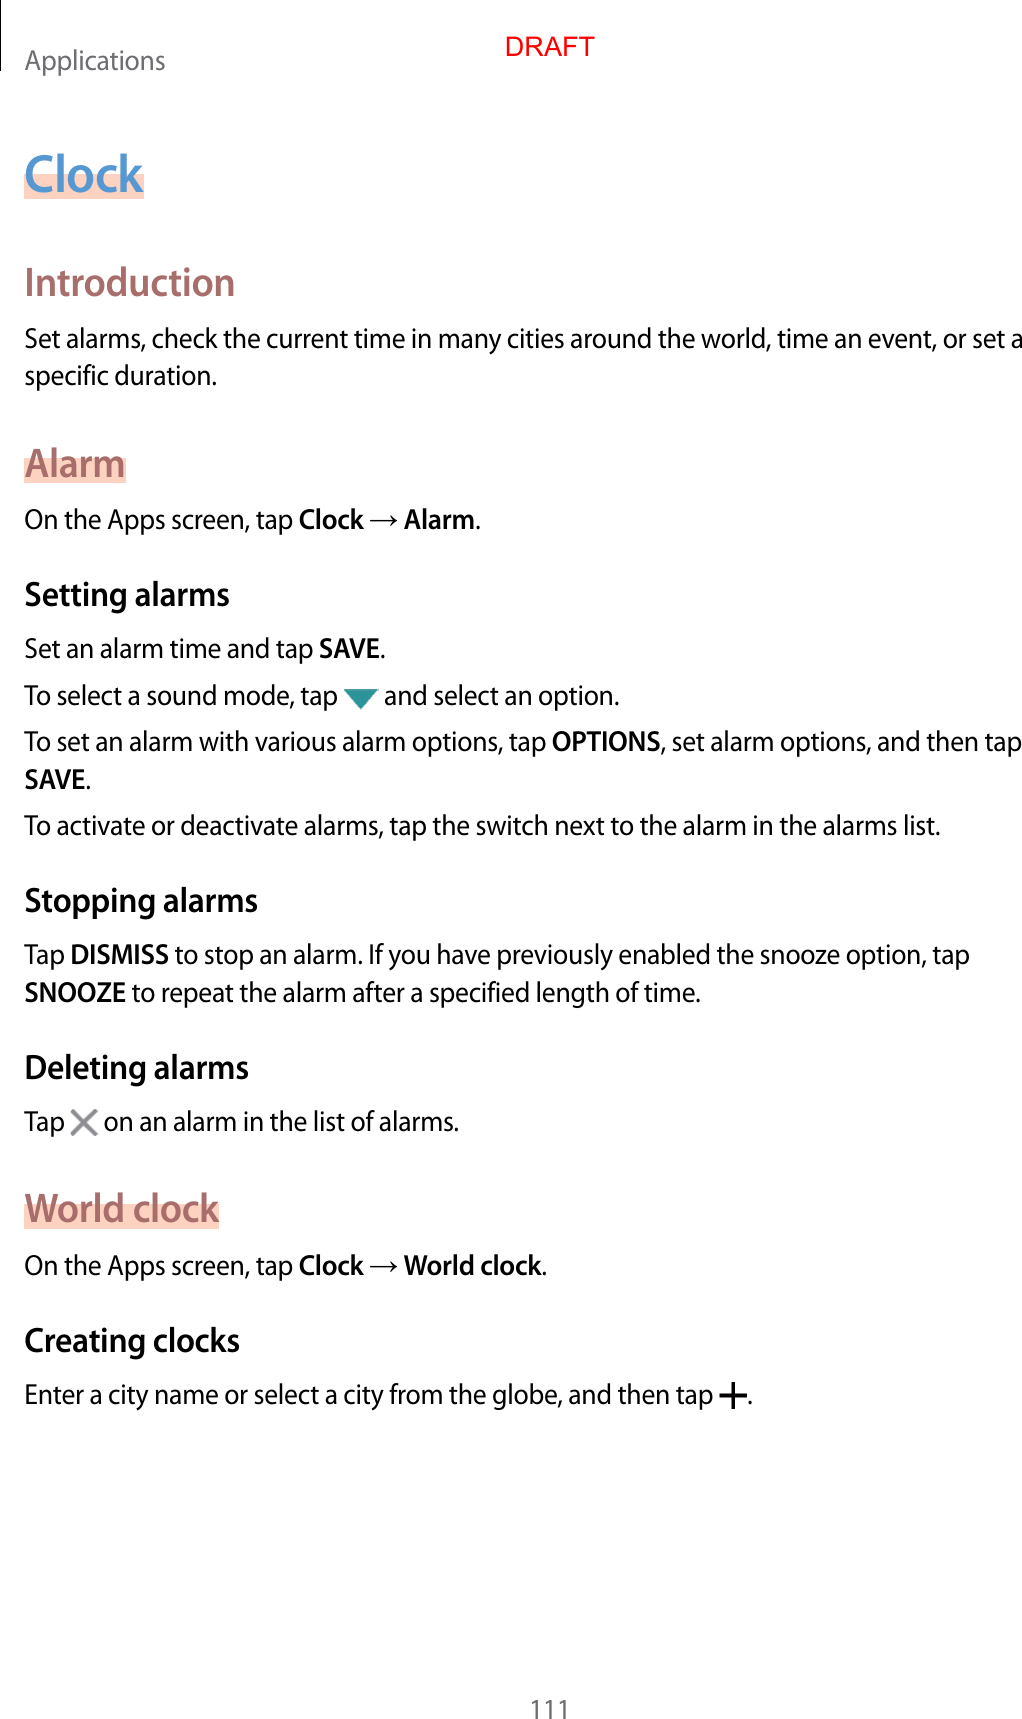 Applications111ClockIntroductionSet alarms, check the current time in man y cities ar ound the w orld , time an ev ent, or set a specific duration.AlarmOn the Apps screen, tap Clock  Alarm.Setting alarmsSet an alarm time and tap SAVE.To select a sound mode, tap   and select an option.To set an alarm with various alarm options, tap OPTIONS, set alarm options, and then tap SAVE.To activate or deactivate alarms, tap the switch ne xt to the alarm in the alarms list.Stopping alarmsTap DISMISS to stop an alarm. If you hav e pr eviously enabled the snoo z e option, tap SNOOZE to repea t the alarm after a specified length of time.Deleting alarmsTap   on an alarm in the list of alarms.World clockOn the Apps screen, tap Clock  World clock.Crea ting clocksEnter a city name or select a city from the globe , and then tap  .DRAFT